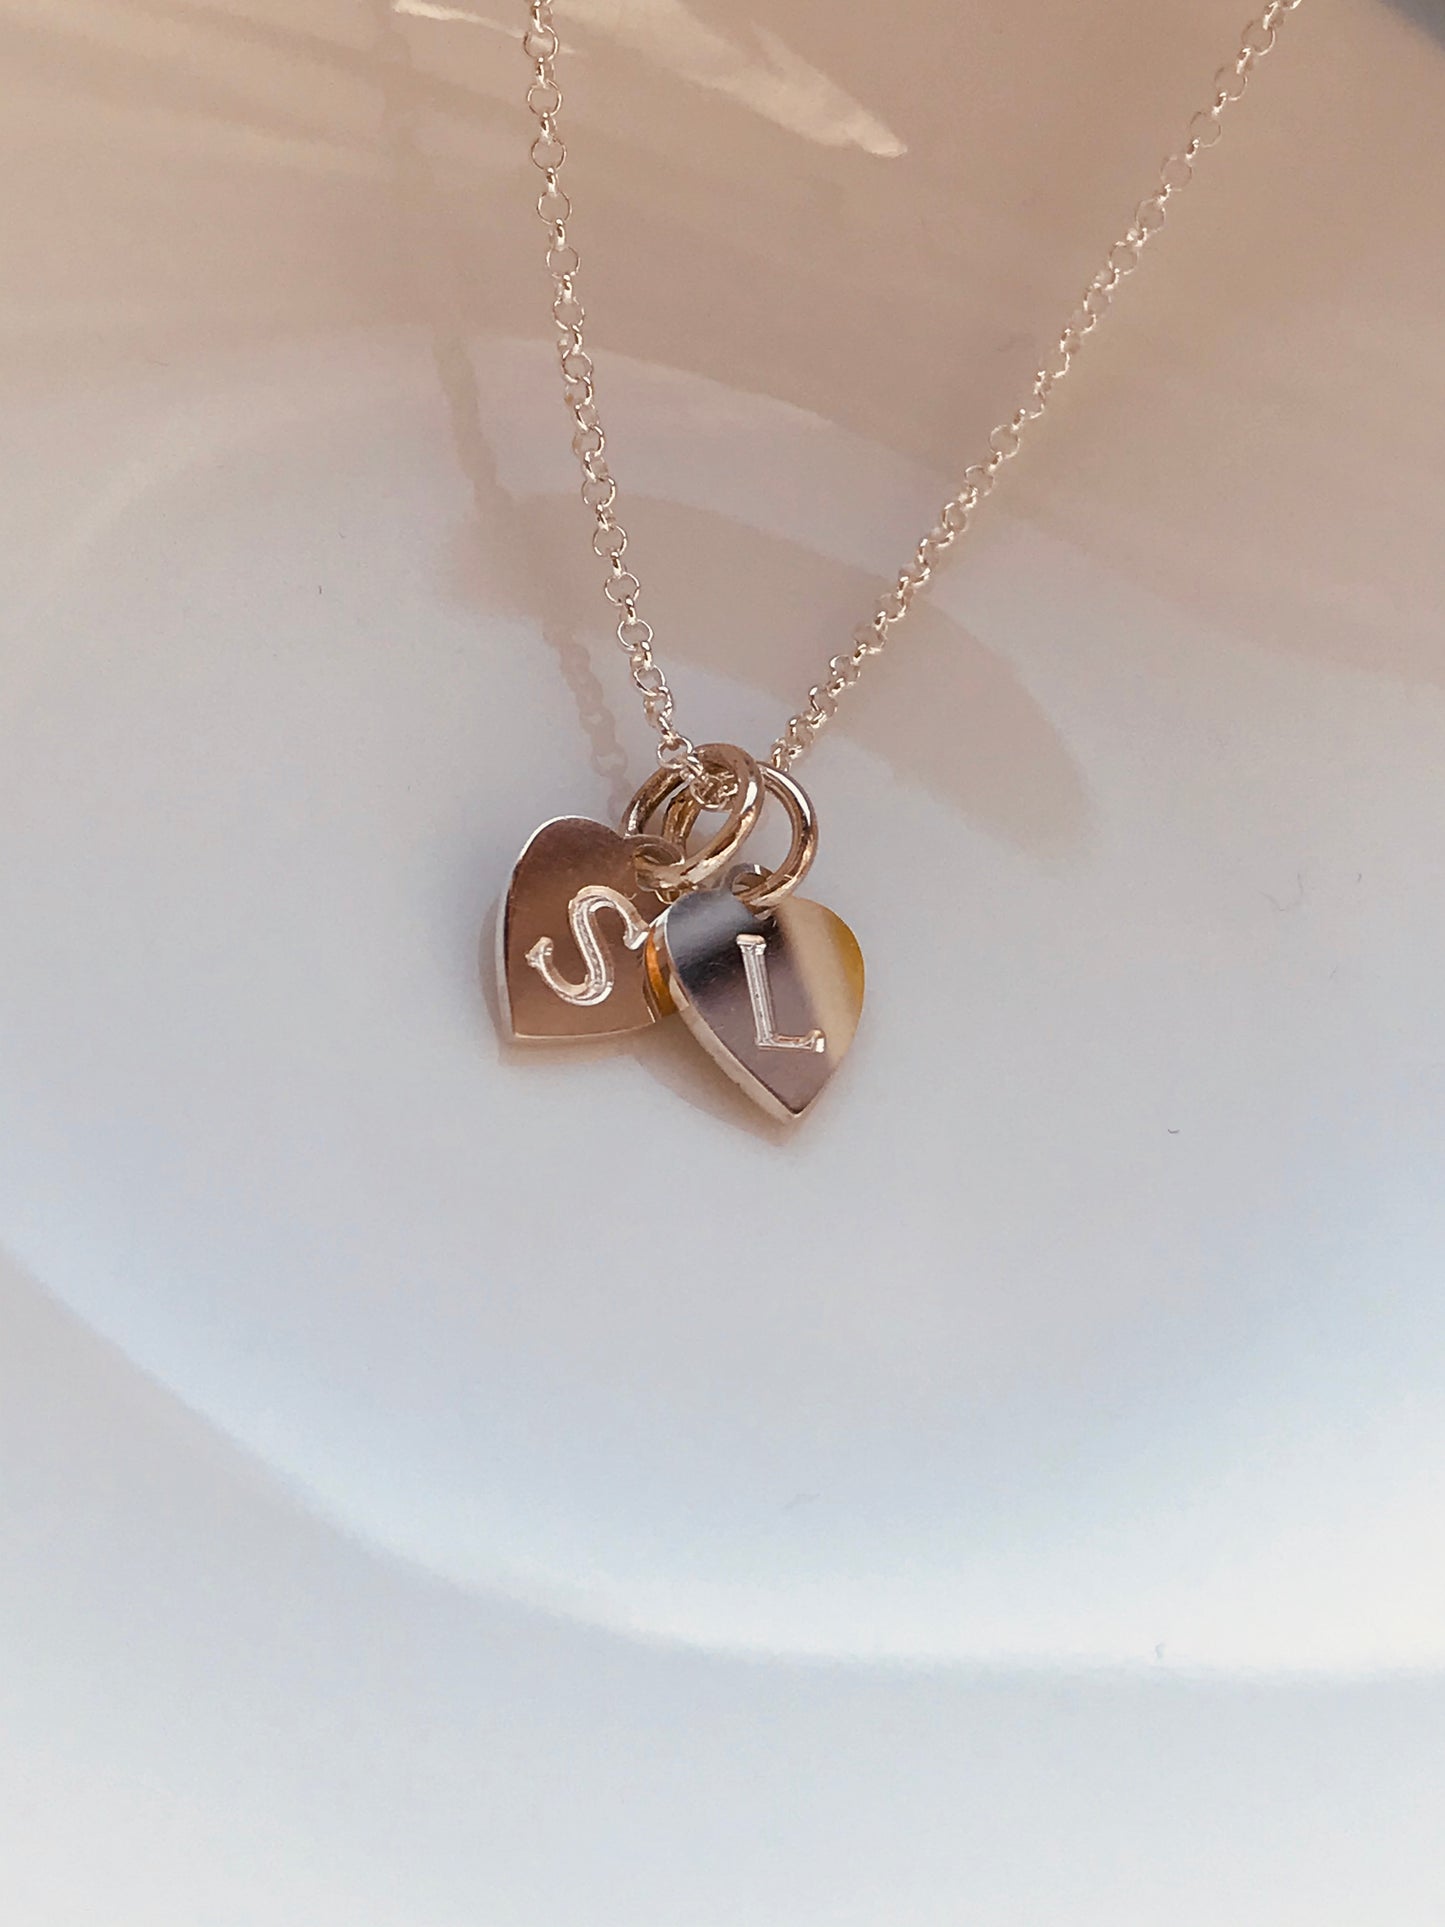 STACKED HEARTS necklace - BYVELA jewellery